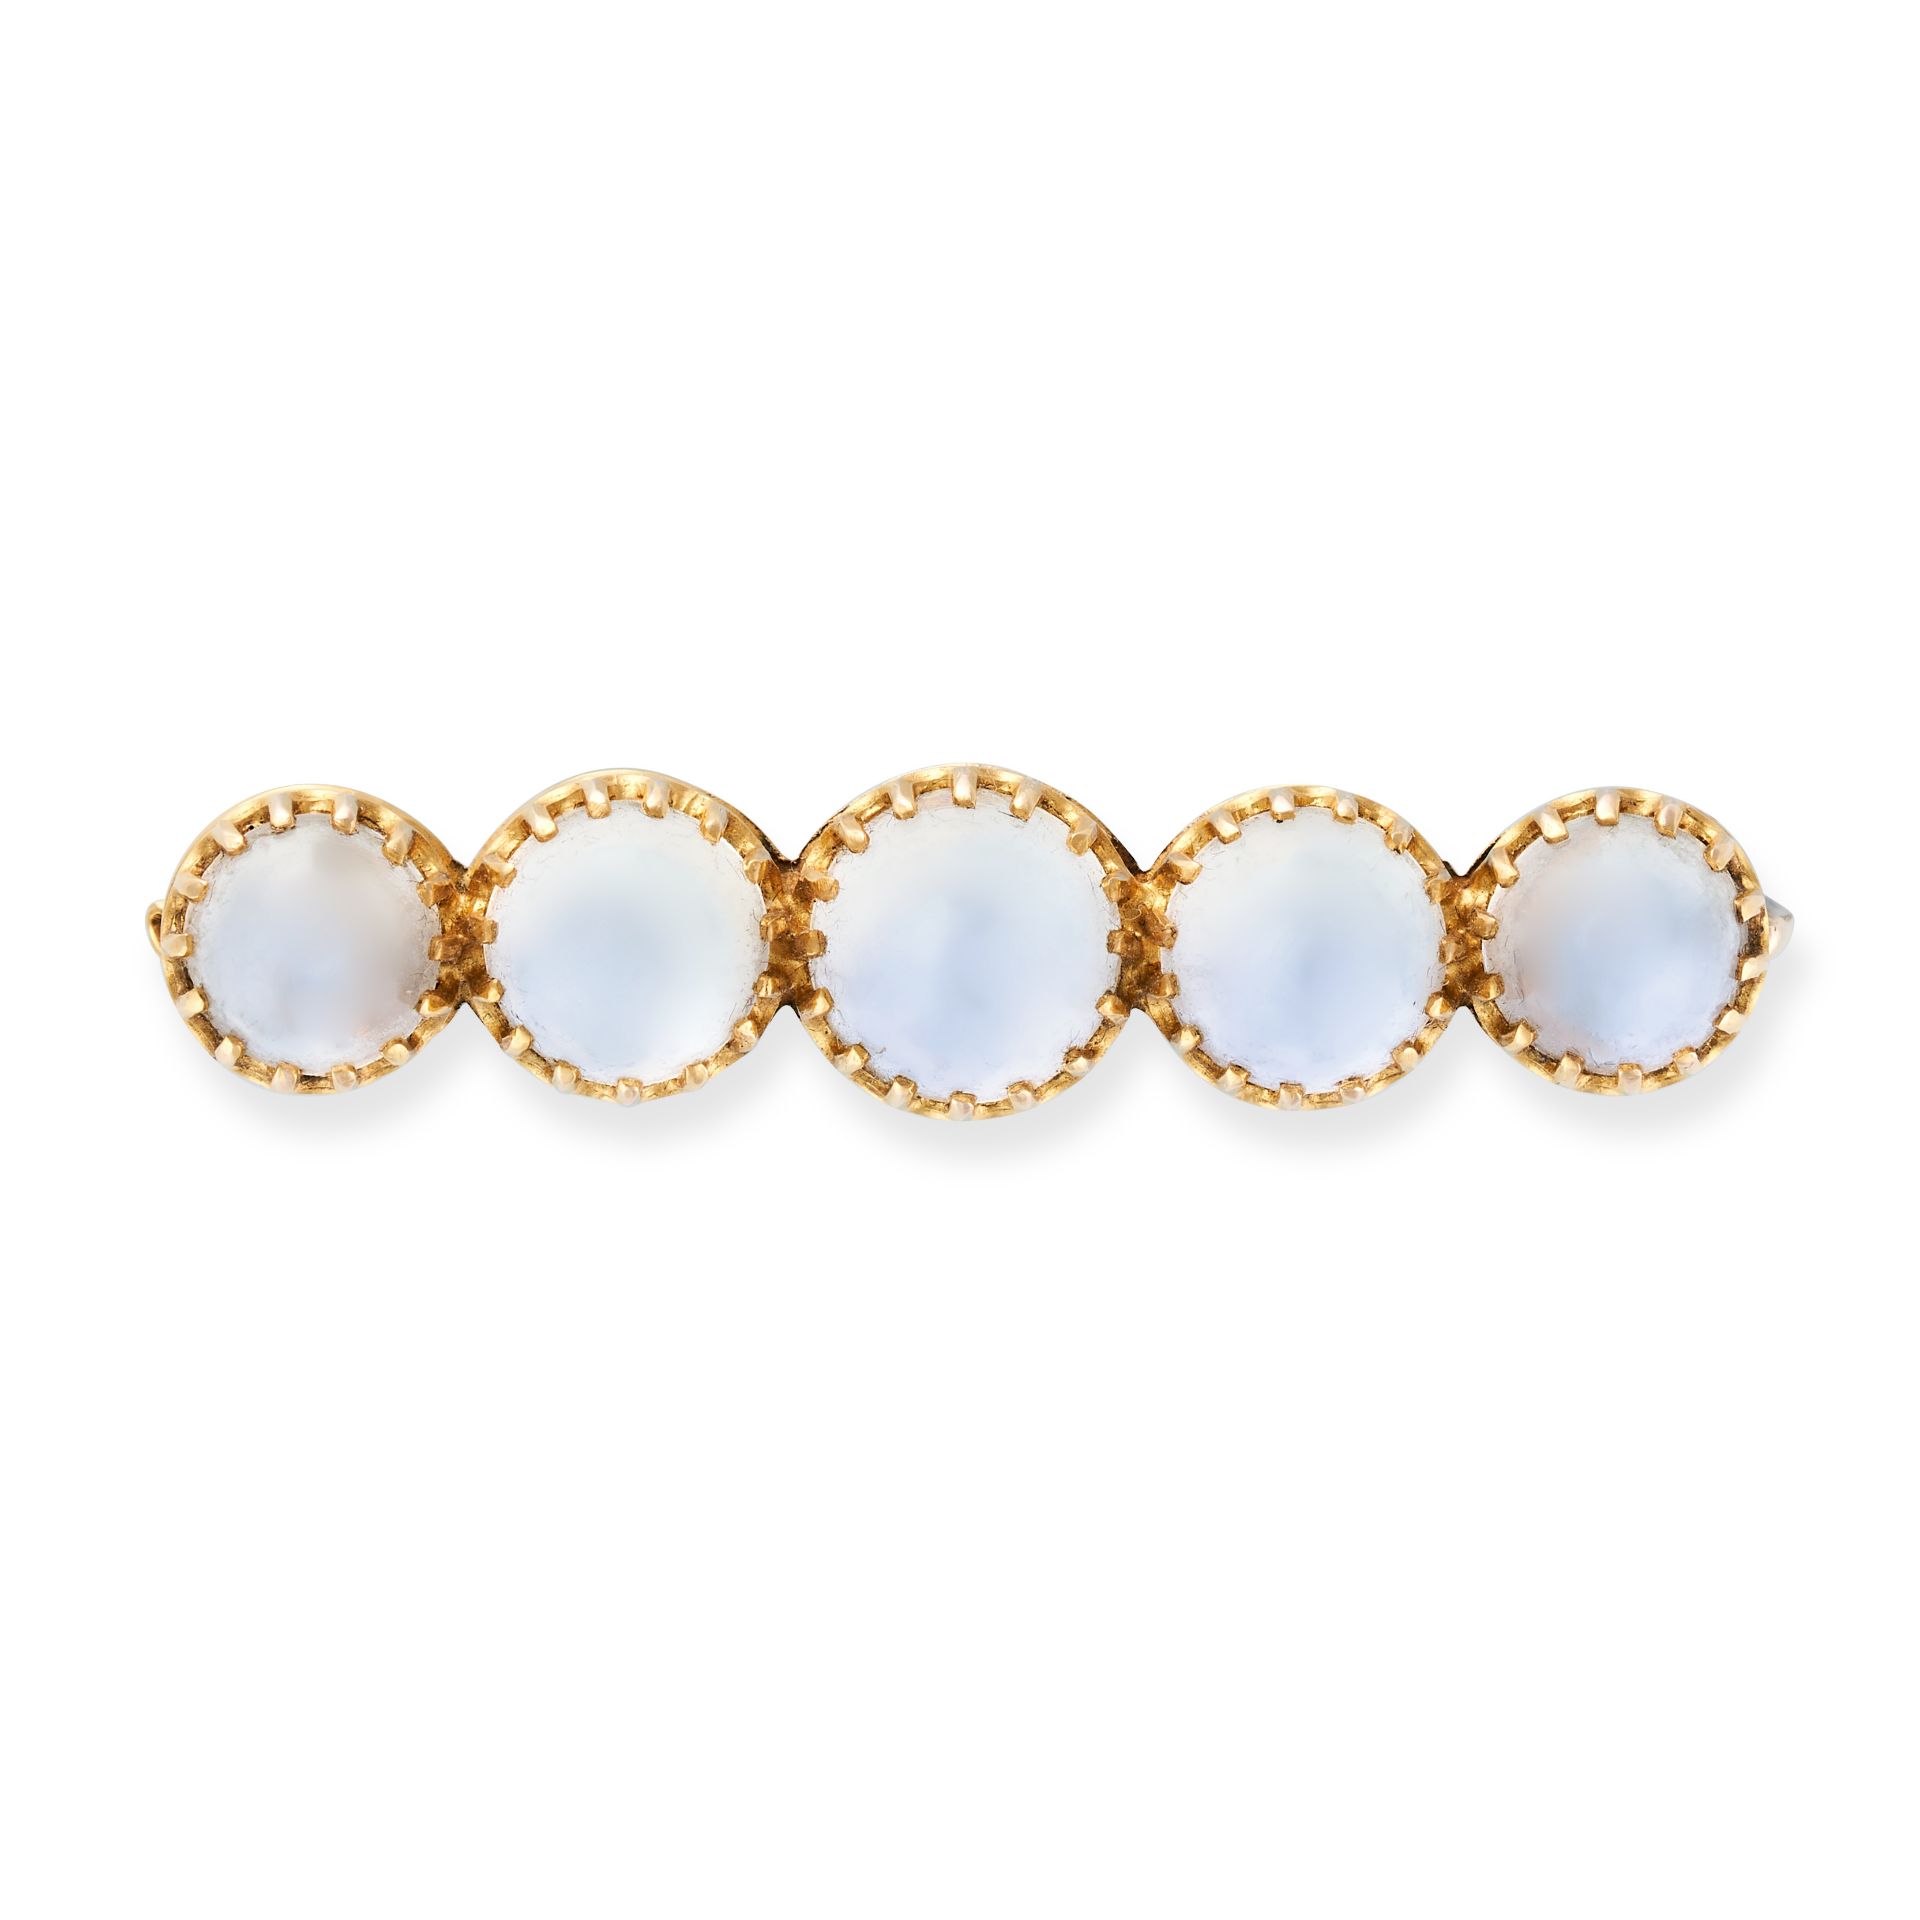 AN ANTIQUE MOONSTONE BAR BROOCH in 15ct yellow gold, set with a row of five round cabochon moonst...